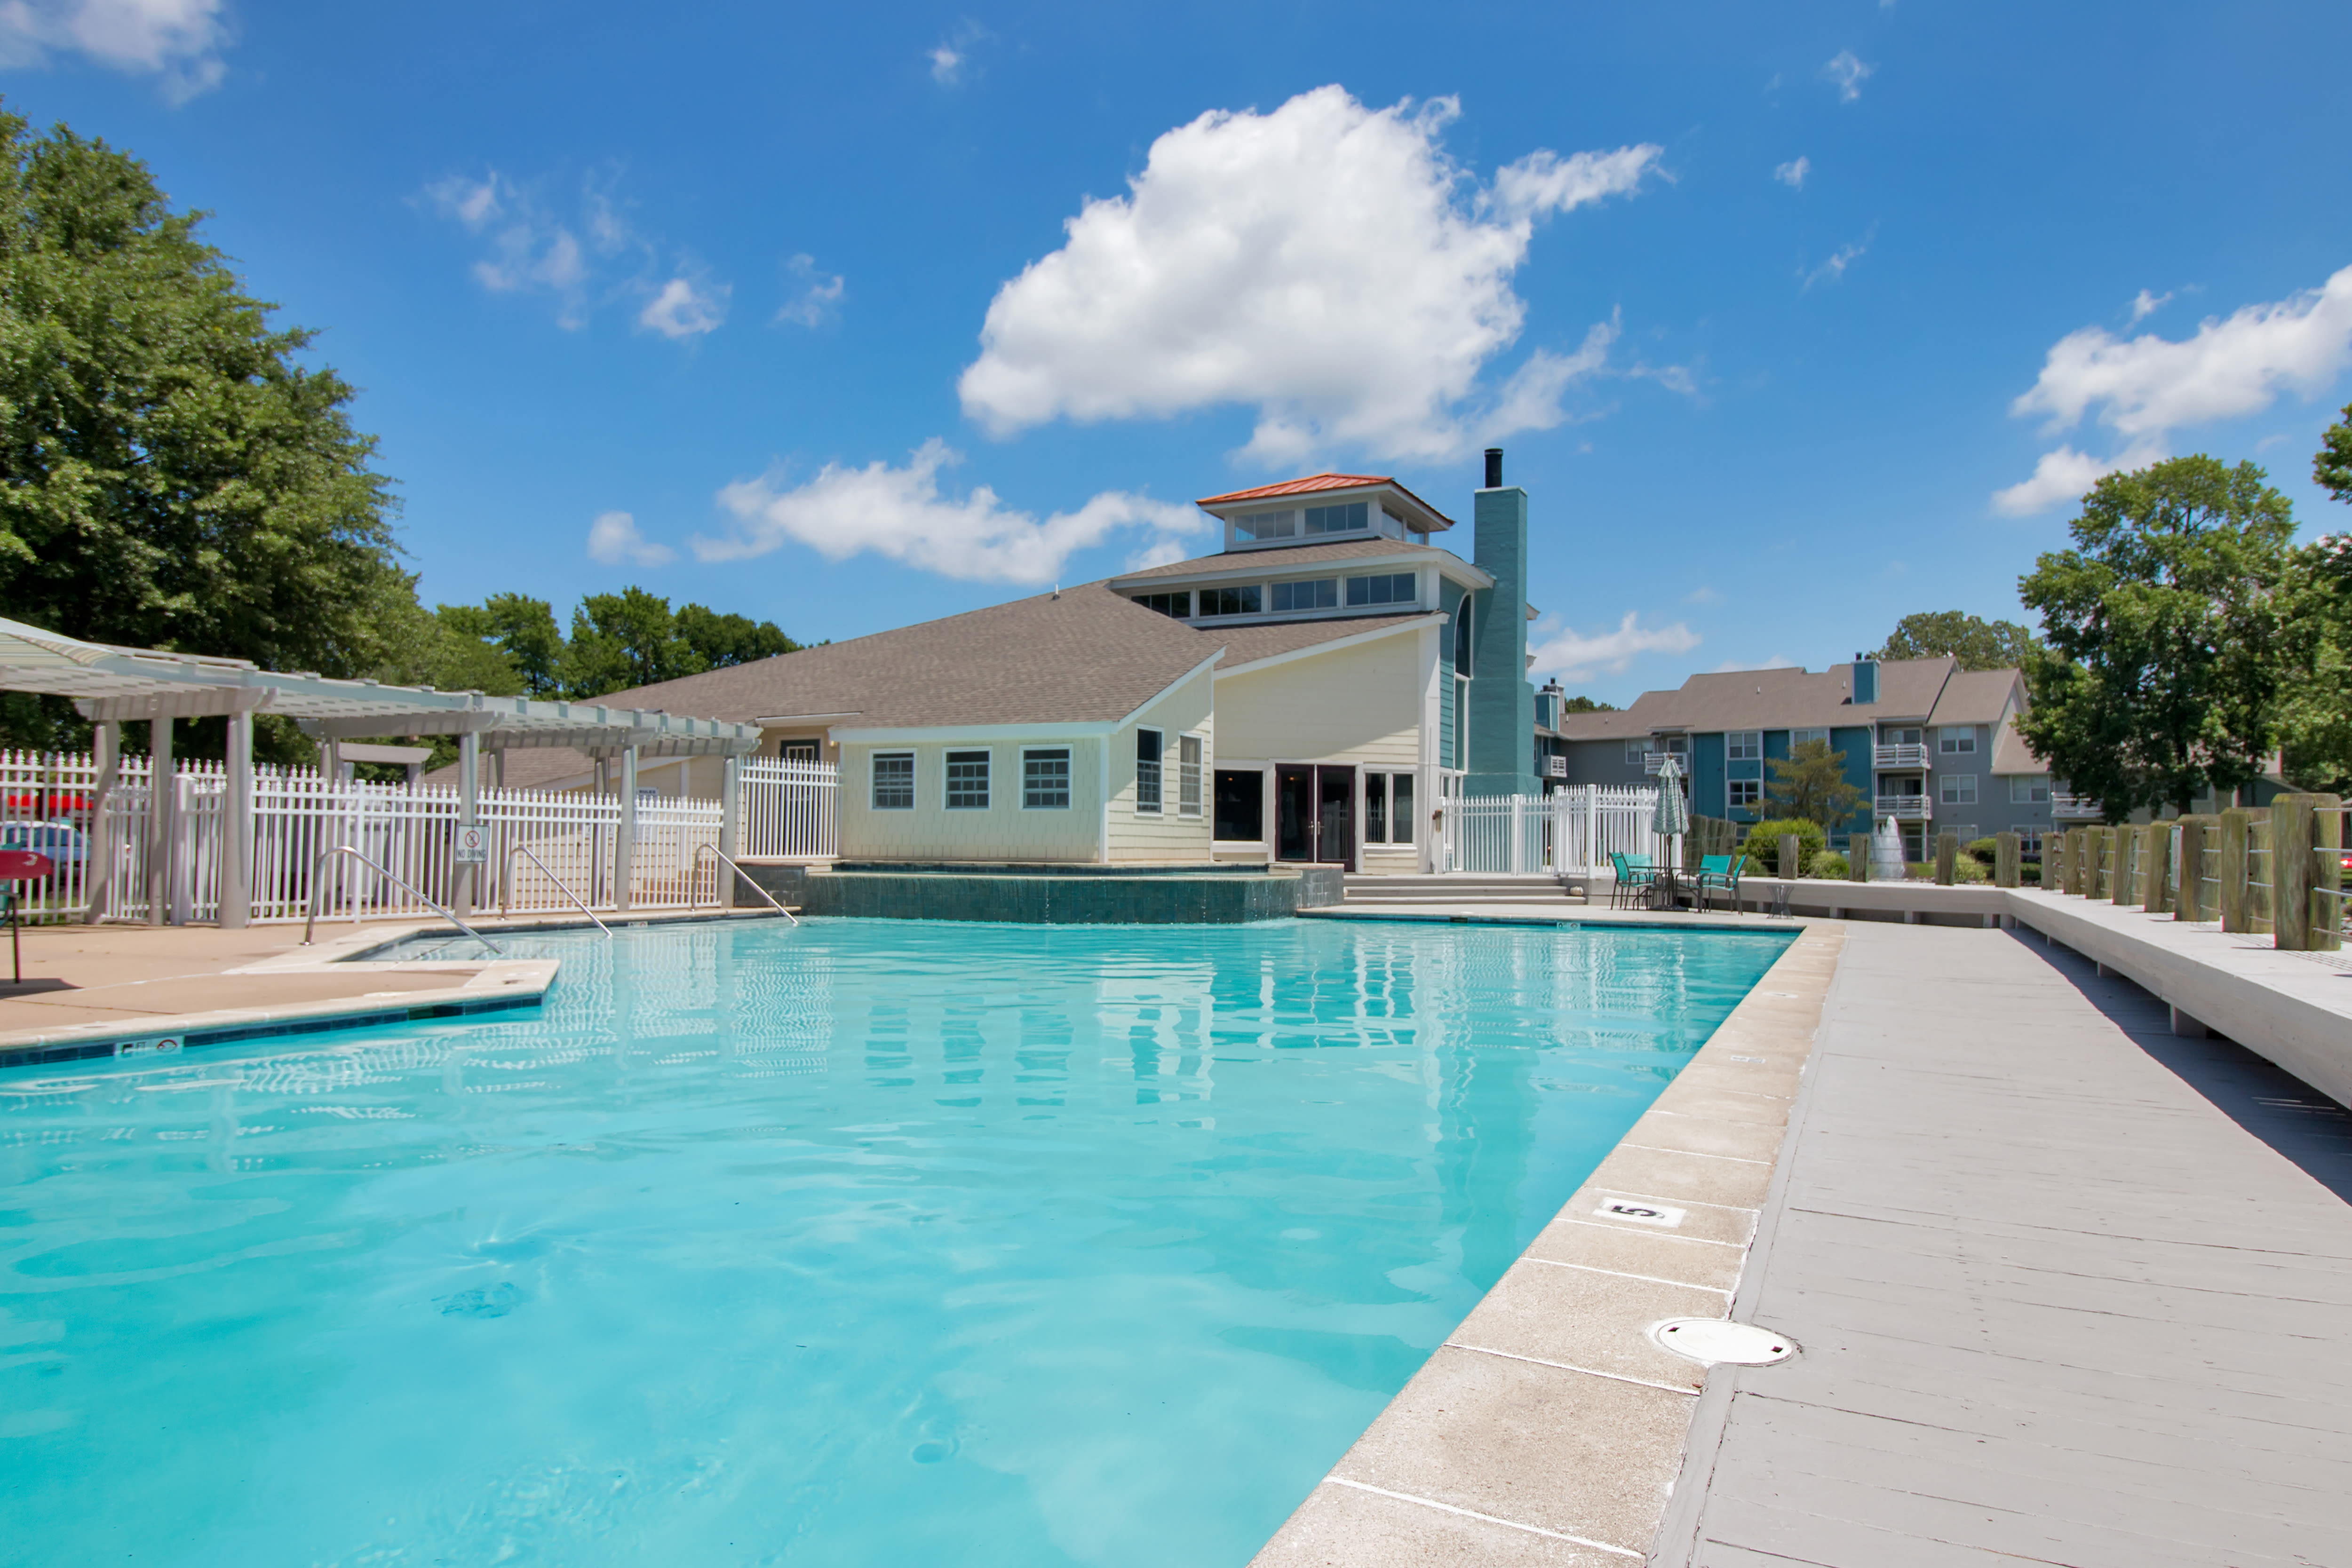 Clubhouse with amenities poolside at Runaway Bay Apartments in Virginia Beach, Virginia